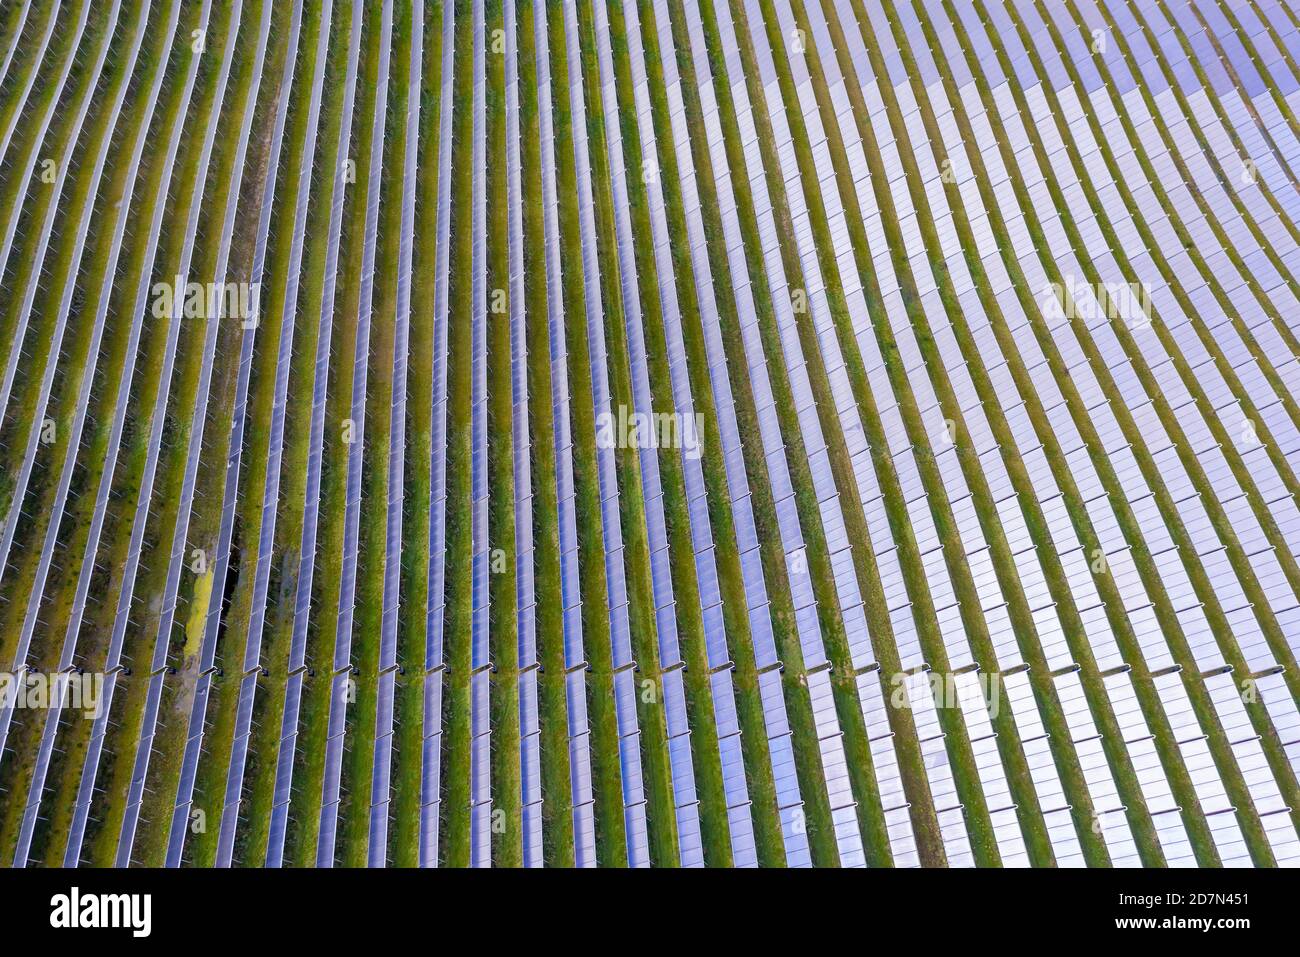 Solar Energy Park in Silkeborg, Denmark. It covers an area of 156.000 m2 or 22 football fields and has 12,000 solar panels. Stock Photo